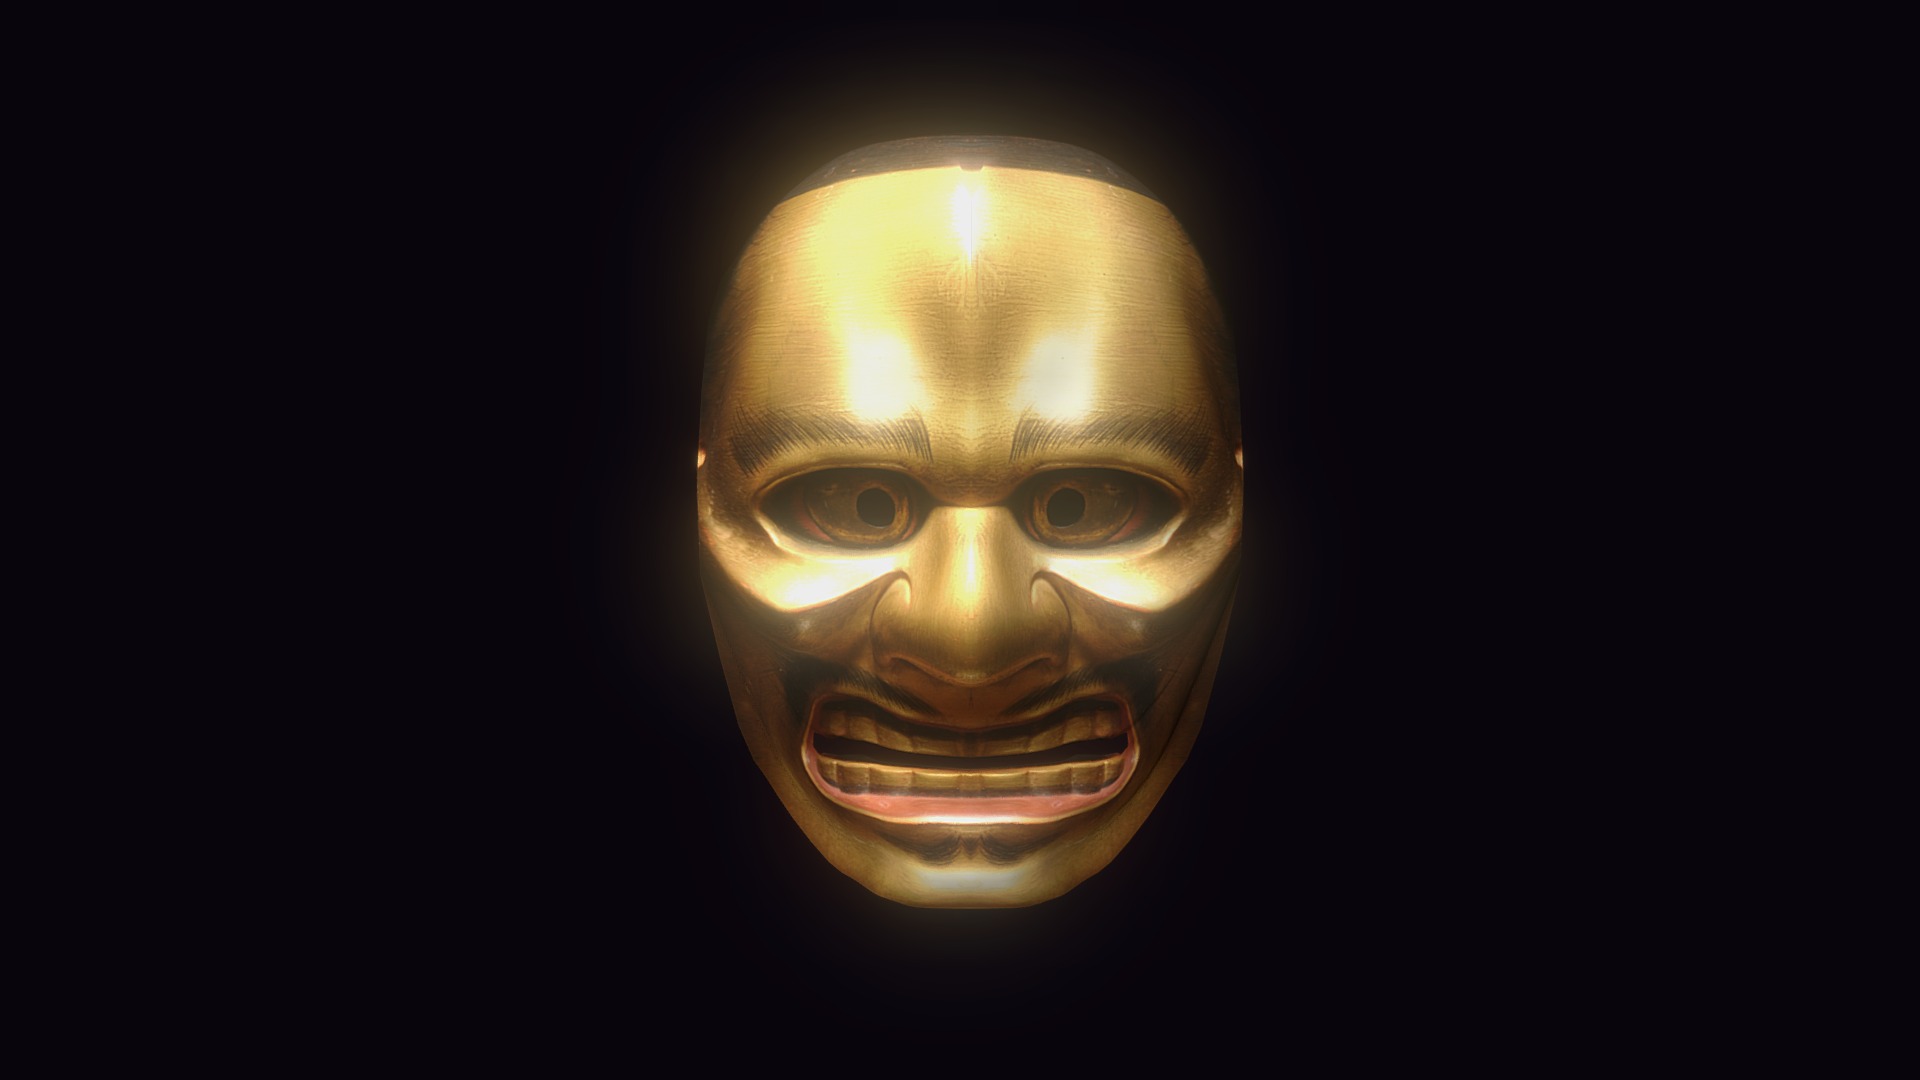 A noh mask noumen 能面 representing the God of Thunder. Great metallic gold eyeballs with large holes as pupils beneath a sharp ridge of the eyebrows dominate the mask. The eyes are lined with blue and vermillion paint. The wide-open mouth stretching across the face to expose long rows of the upper and lower teeth, the tightly bulging cheeks, and a large, flat nose create a mighty expression. Except for the black crown that lies at the top of the mask, the entire mask is painted in gold. Can replace ootobide 大飛出 to depict the God of Thunder or in the play KUZU 国栖 where the unusual features of the mask are suitable to depict a buddha. The Umewaka 梅若 family possess a good example attributed to Deme Yuukan Mitsuyasu 出目友閑満庸(d. 1652) 3d model